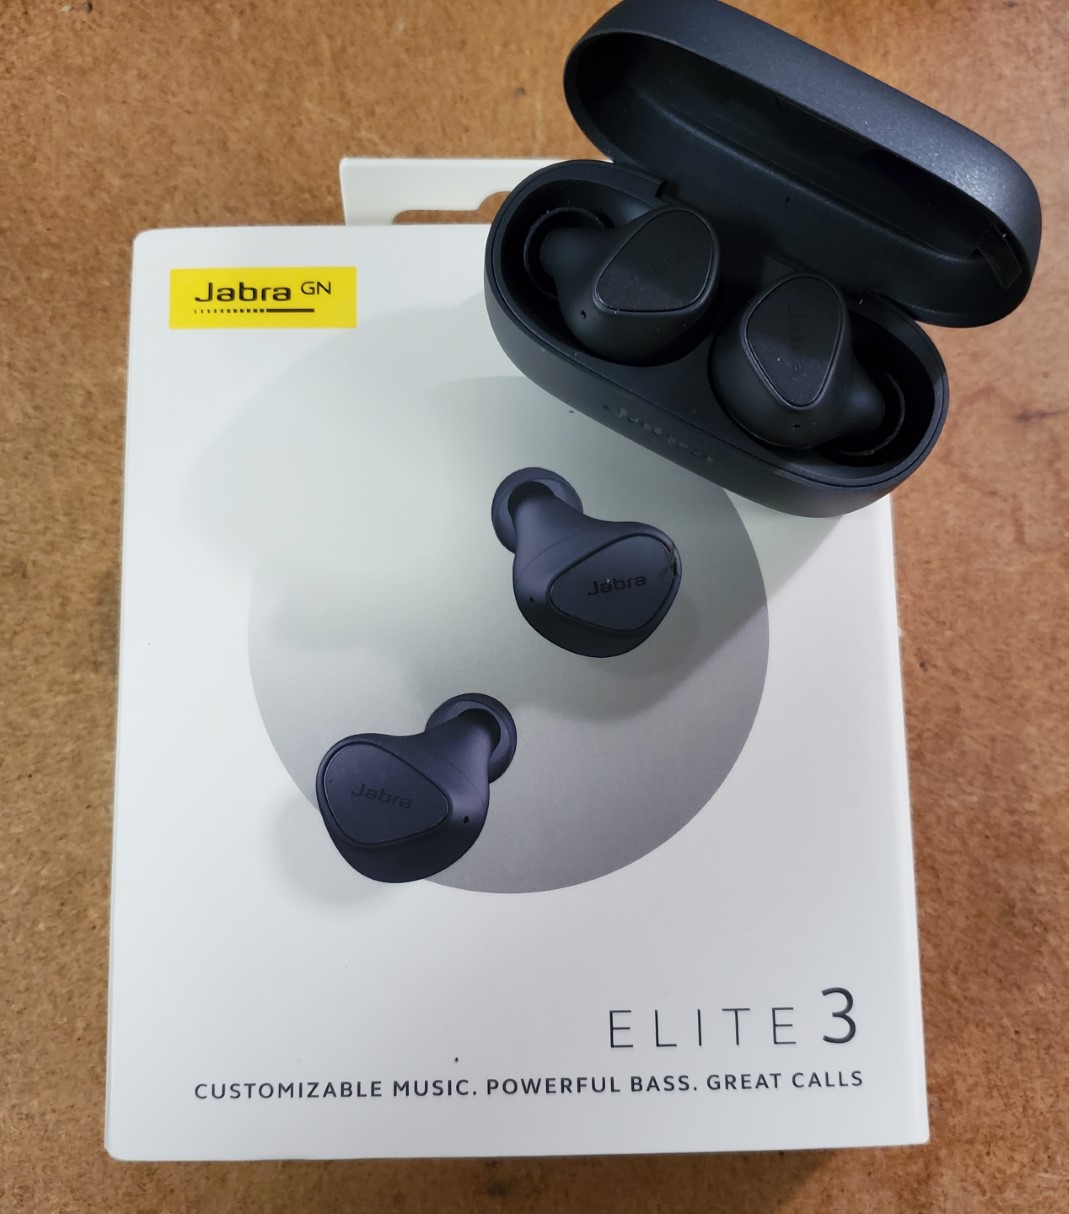 Jabra Elite 3 review: Forget AirPods, these $80 earbuds offer more for less